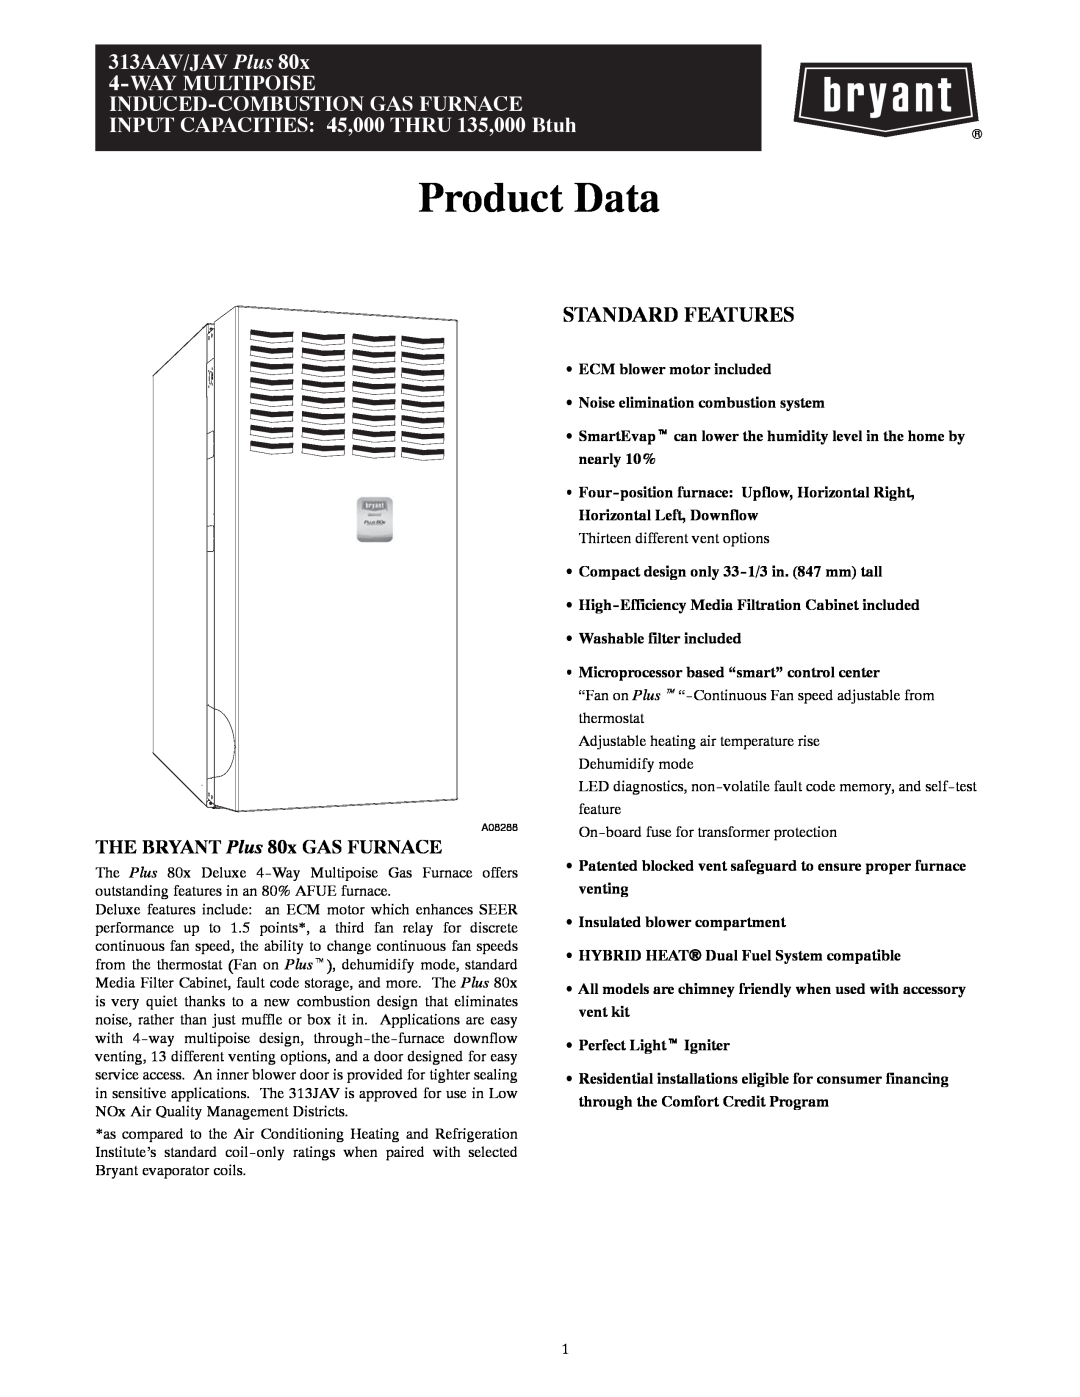 Bryant manual Standard Features, THE BRYANT Plus 80x GAS FURNACE, Product Data, 313AAV/JAV Plus 